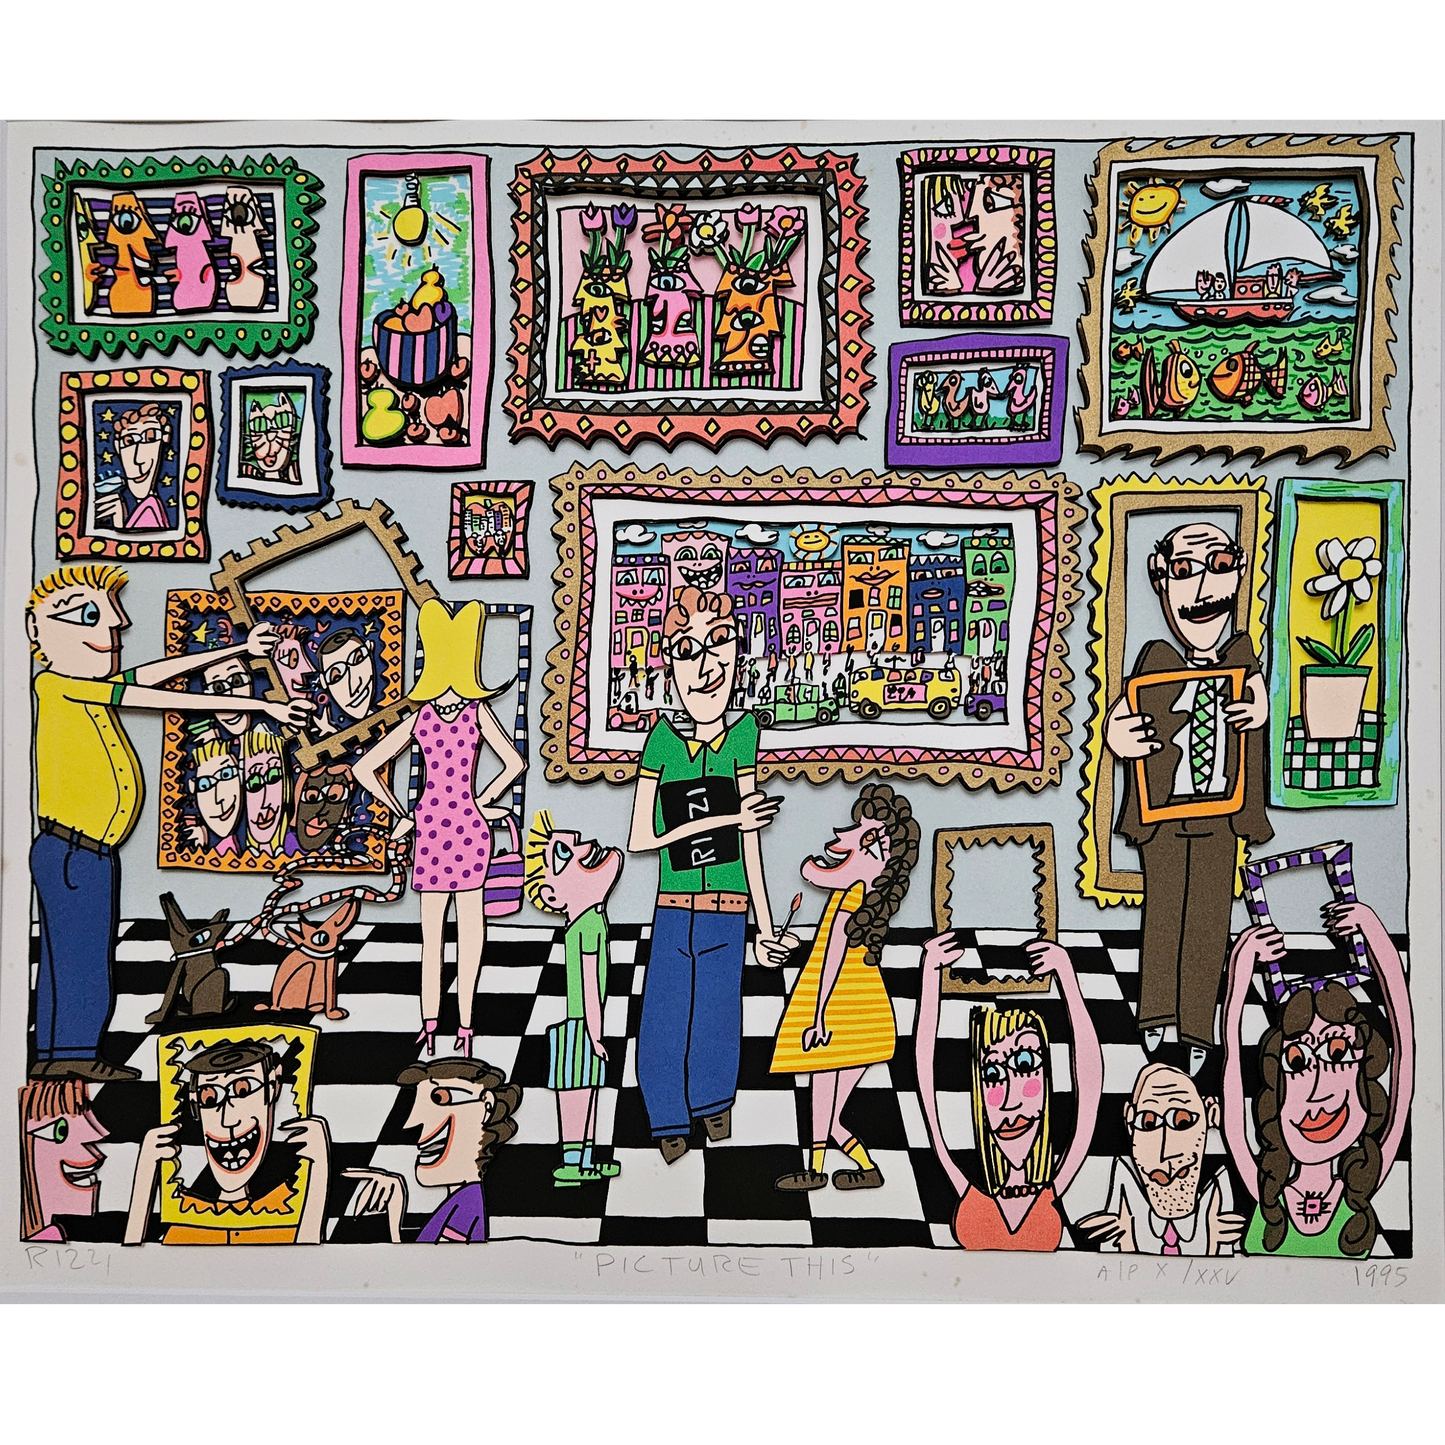 James Rizzi - Picture This (1995)